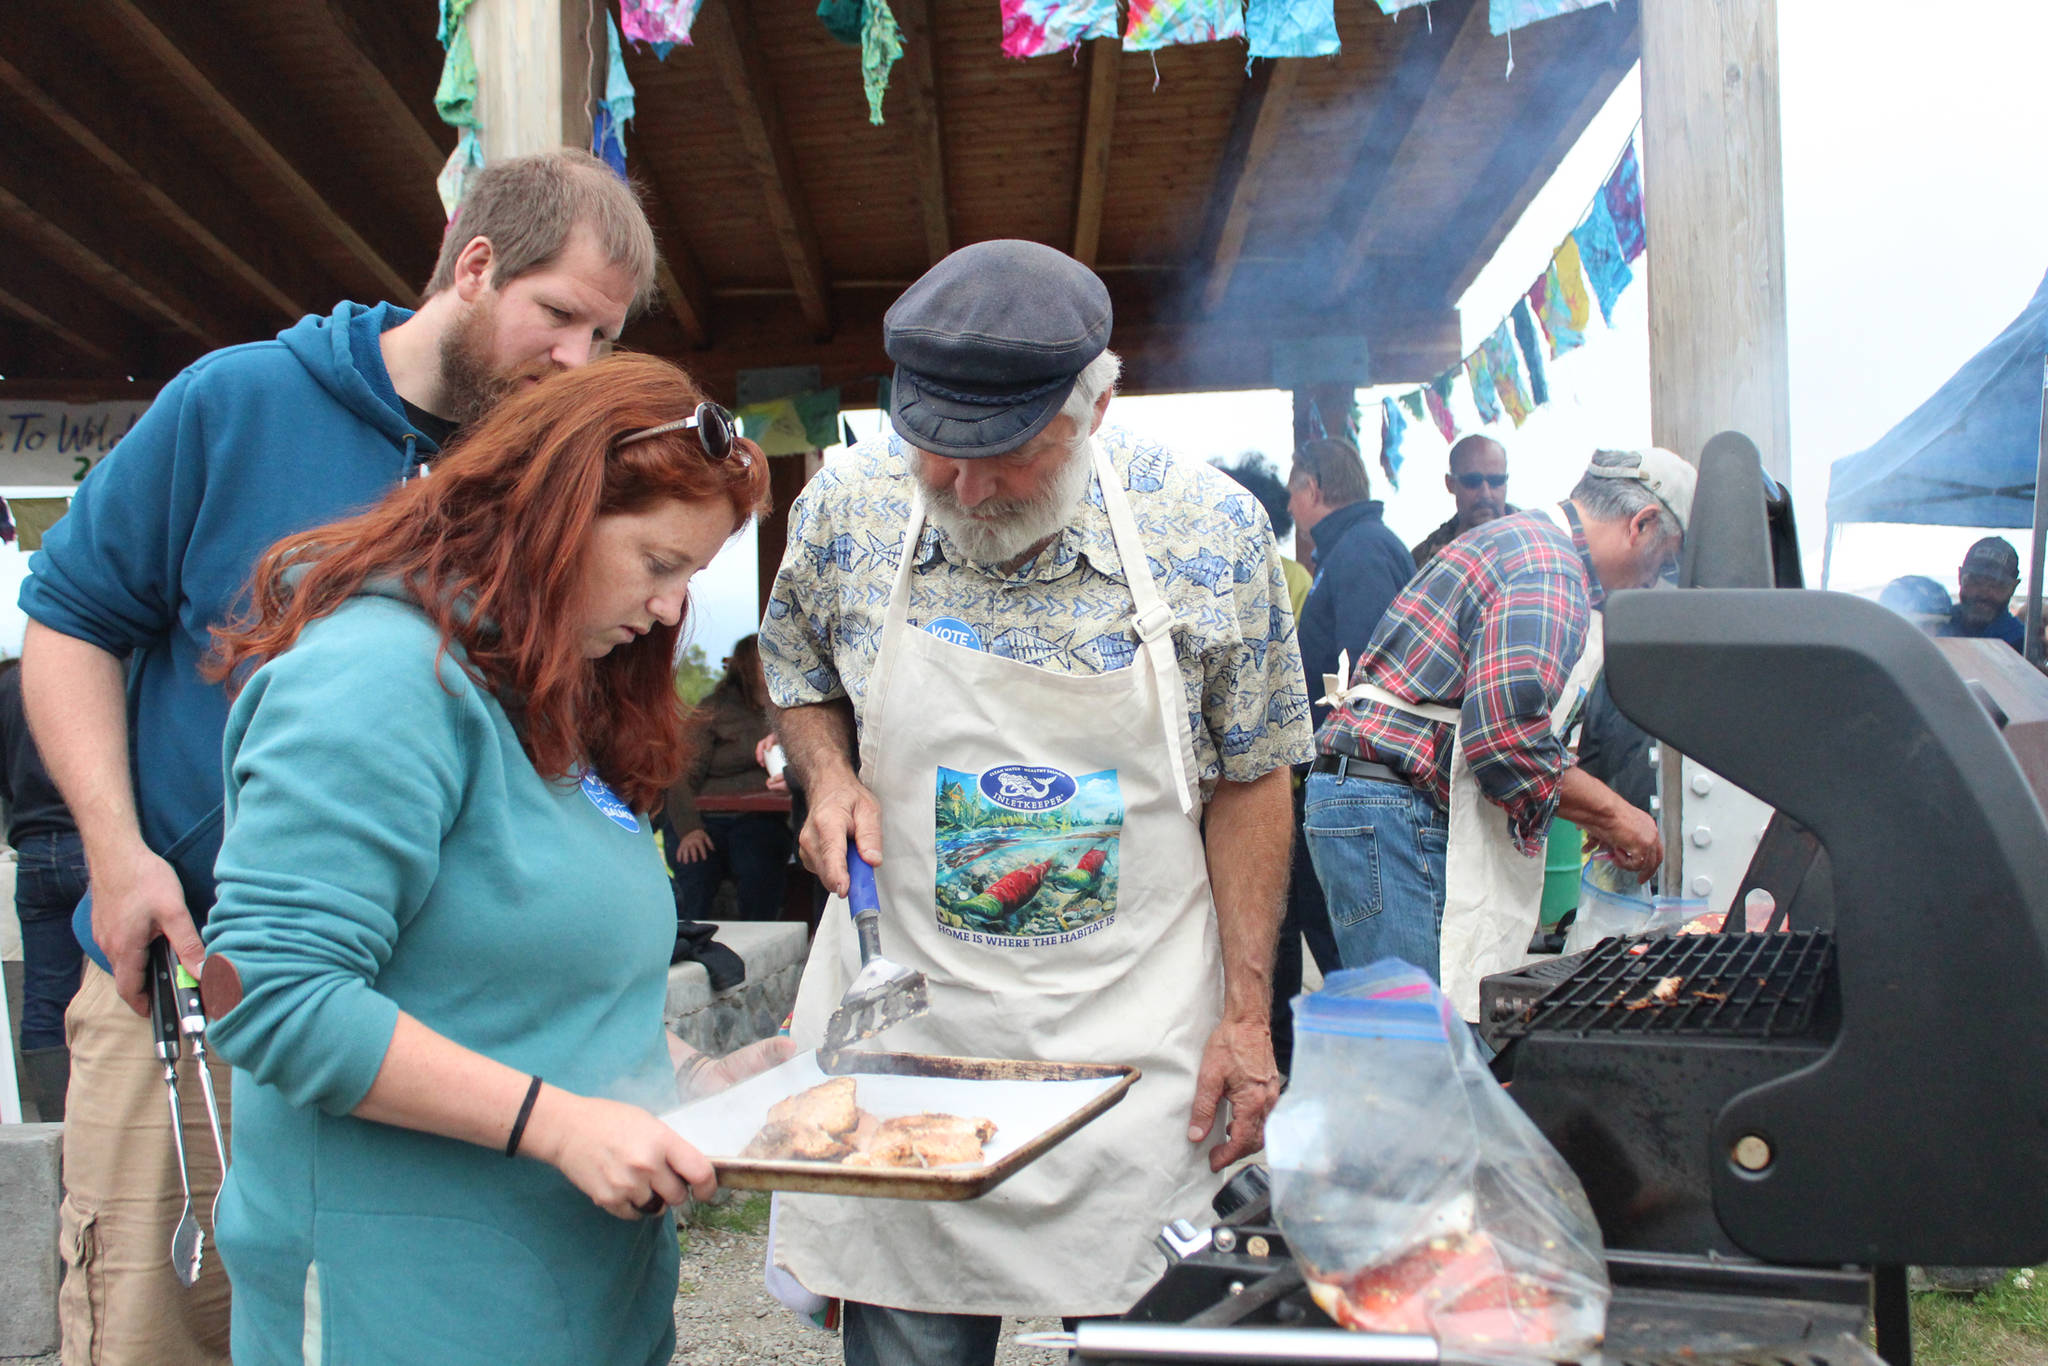 Alaska Rep. Paul Seaton (right) grills salmon with the help of his son, Rand, (left) and daughter-in-law, Lauren during a barbecue at Karen Hornaday Park for Alaska Wild Salmon Day on Friday, Aug. 10, 2018 in Homer, Alaska. (Photo by Megan Pacer/Homer News)